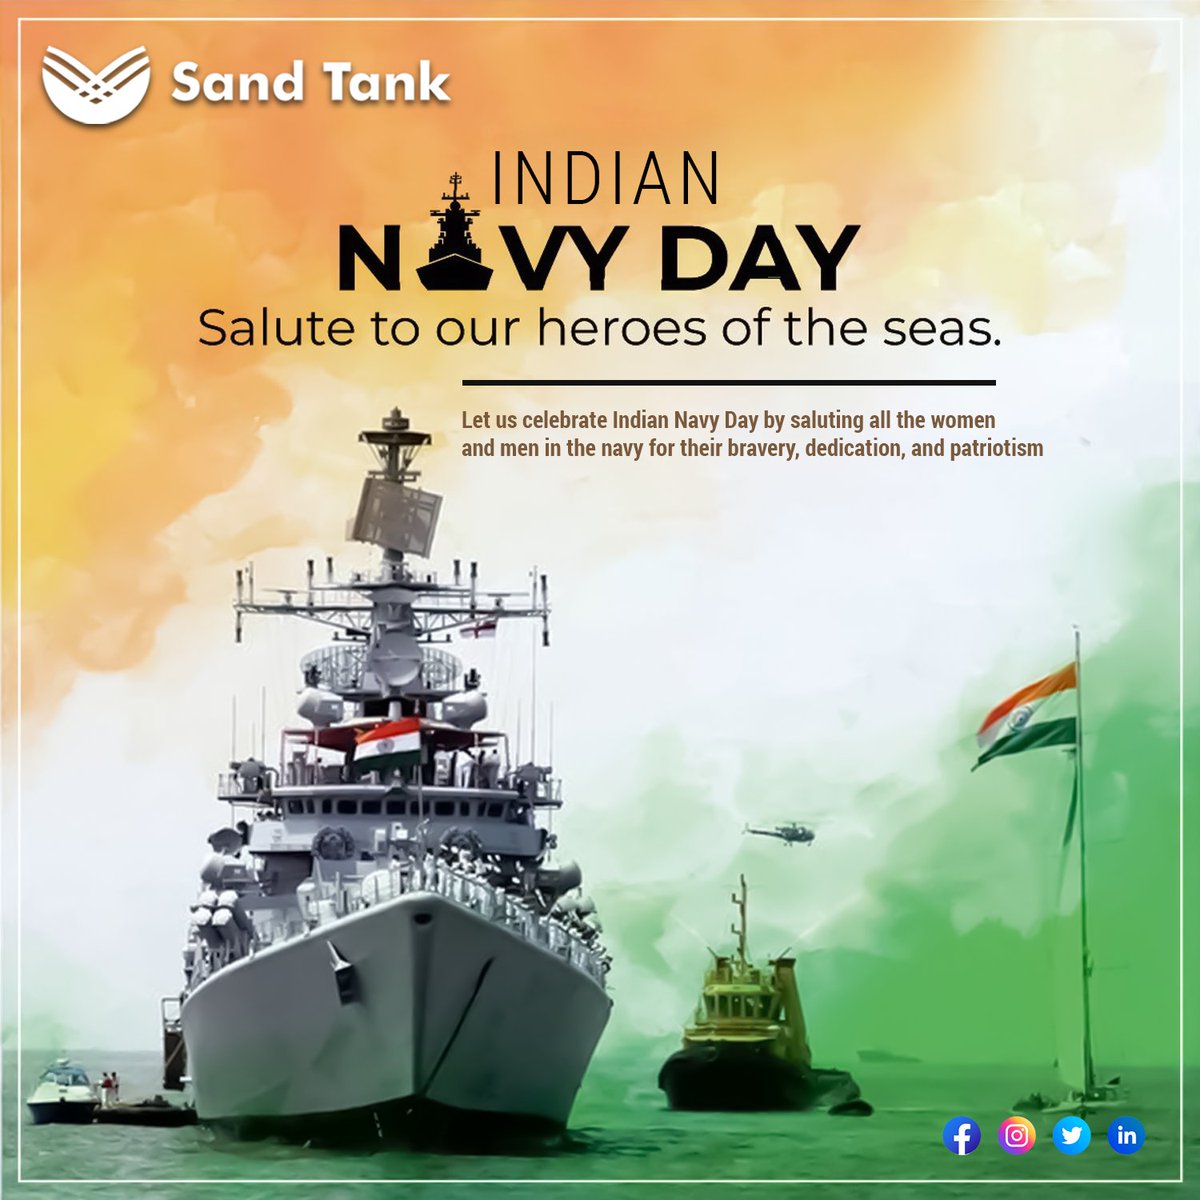 Blue, Bold, and Brave at Heart! 💙⚓ Happy Indian Navy Day to the courageous men and women who stand tall on the high seas, ensuring the safety and security of our nation. 

#Sandtankfoundation #IndianNavyDay #NavyDay #SaluteToNavy #GuardiansOfTheSeas #NavalStrength